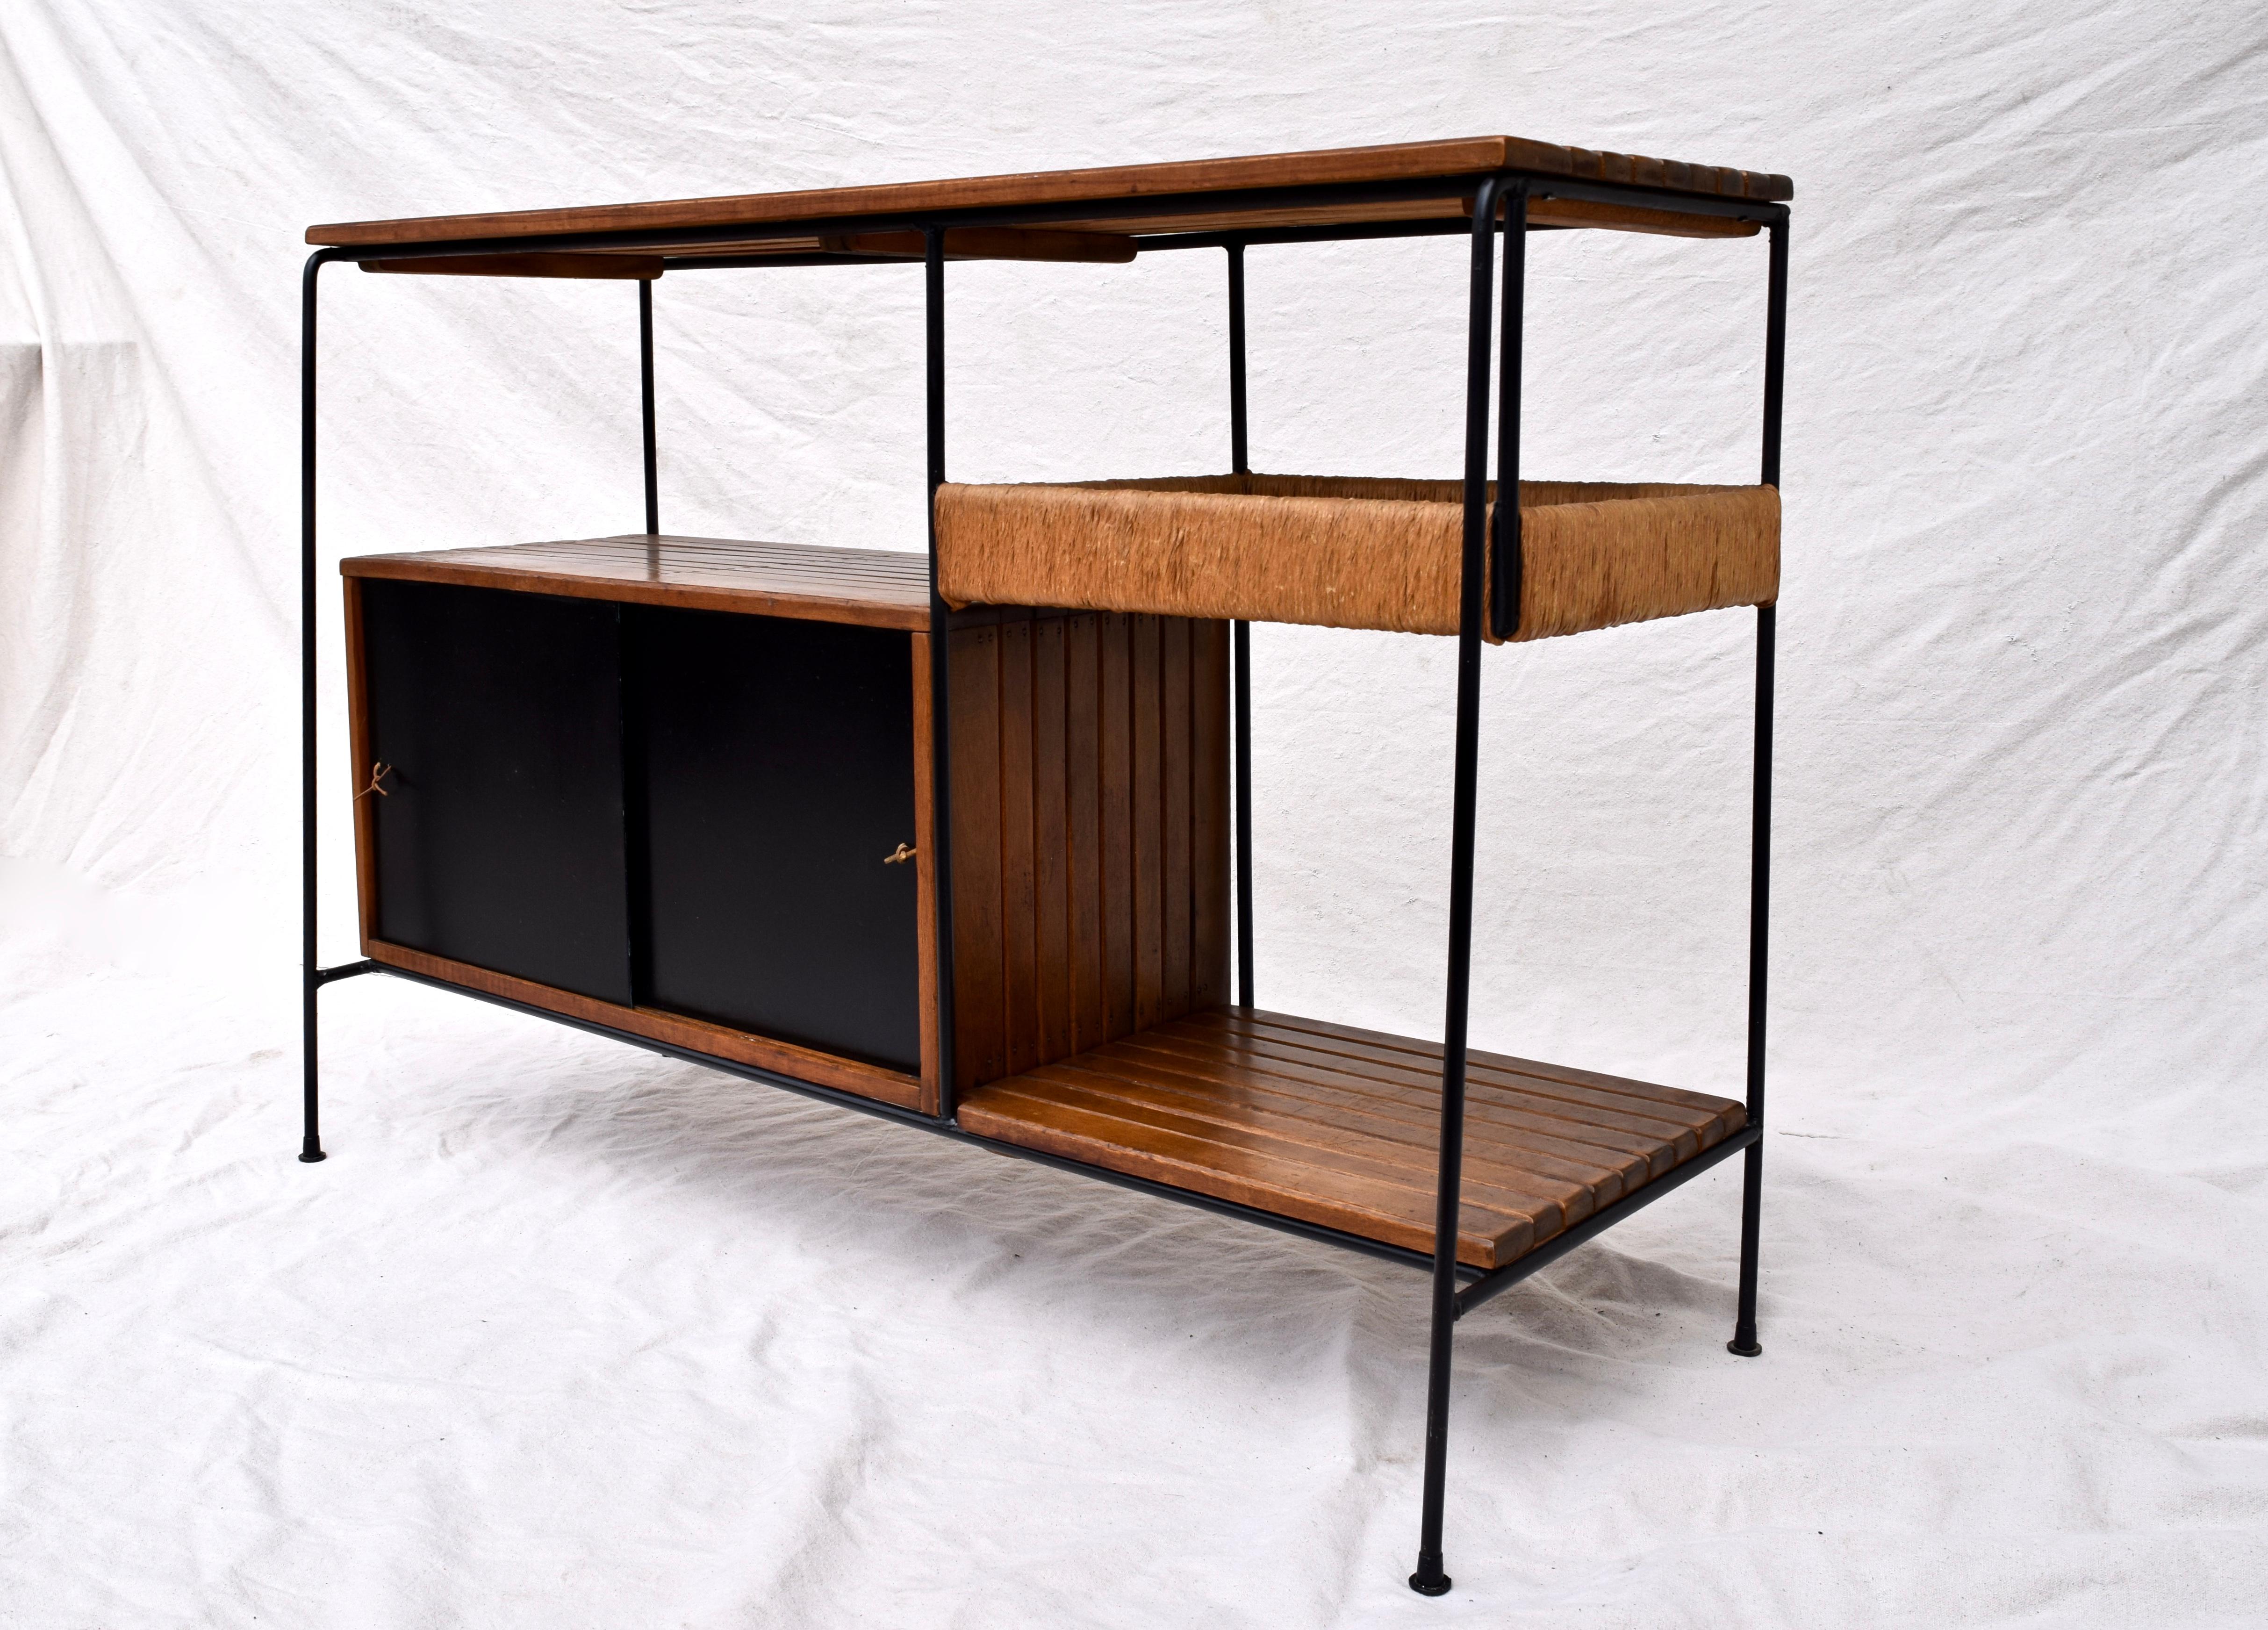 An unusual find by Arthur Umanoff useful as sideboard, server or bar among many possibilities. Features Umanoff's signature style consisting of slat wood, wrought iron, rush, masonite doors and back with leather pulls. We have fully detailed this